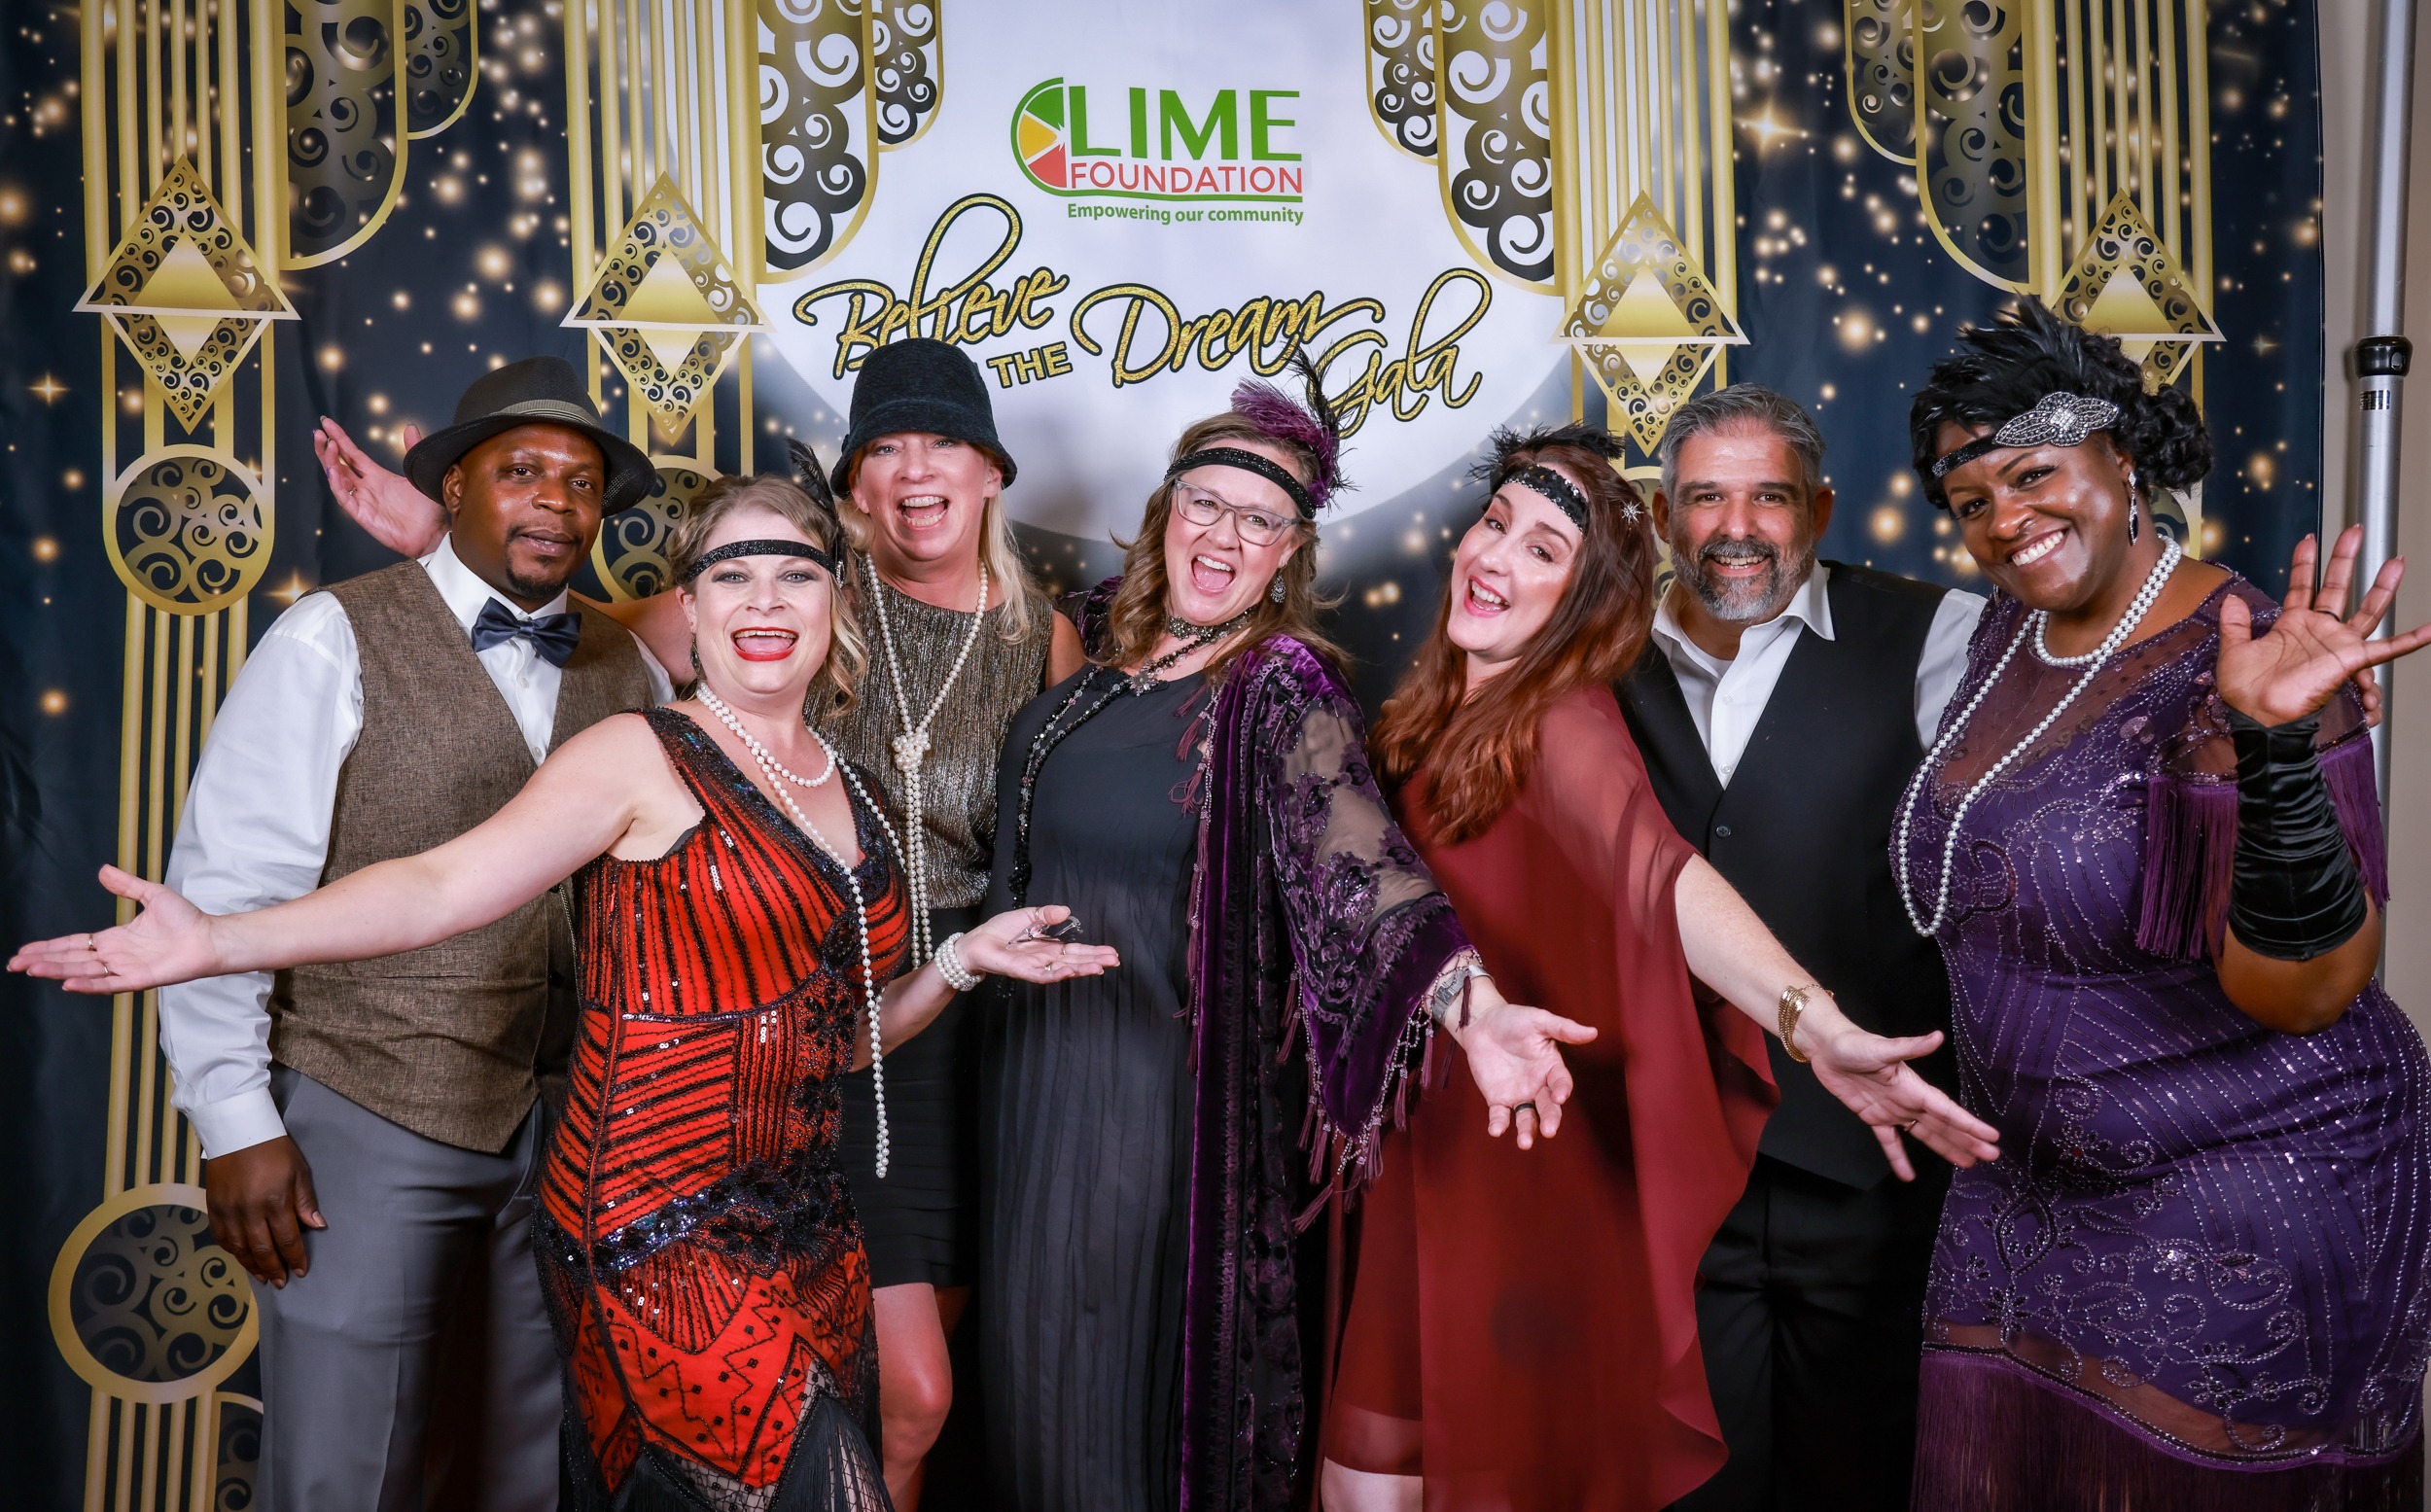 A group of people poses for a photo at a 1920's themed party hosted by a Sonoma County non-profit organization.